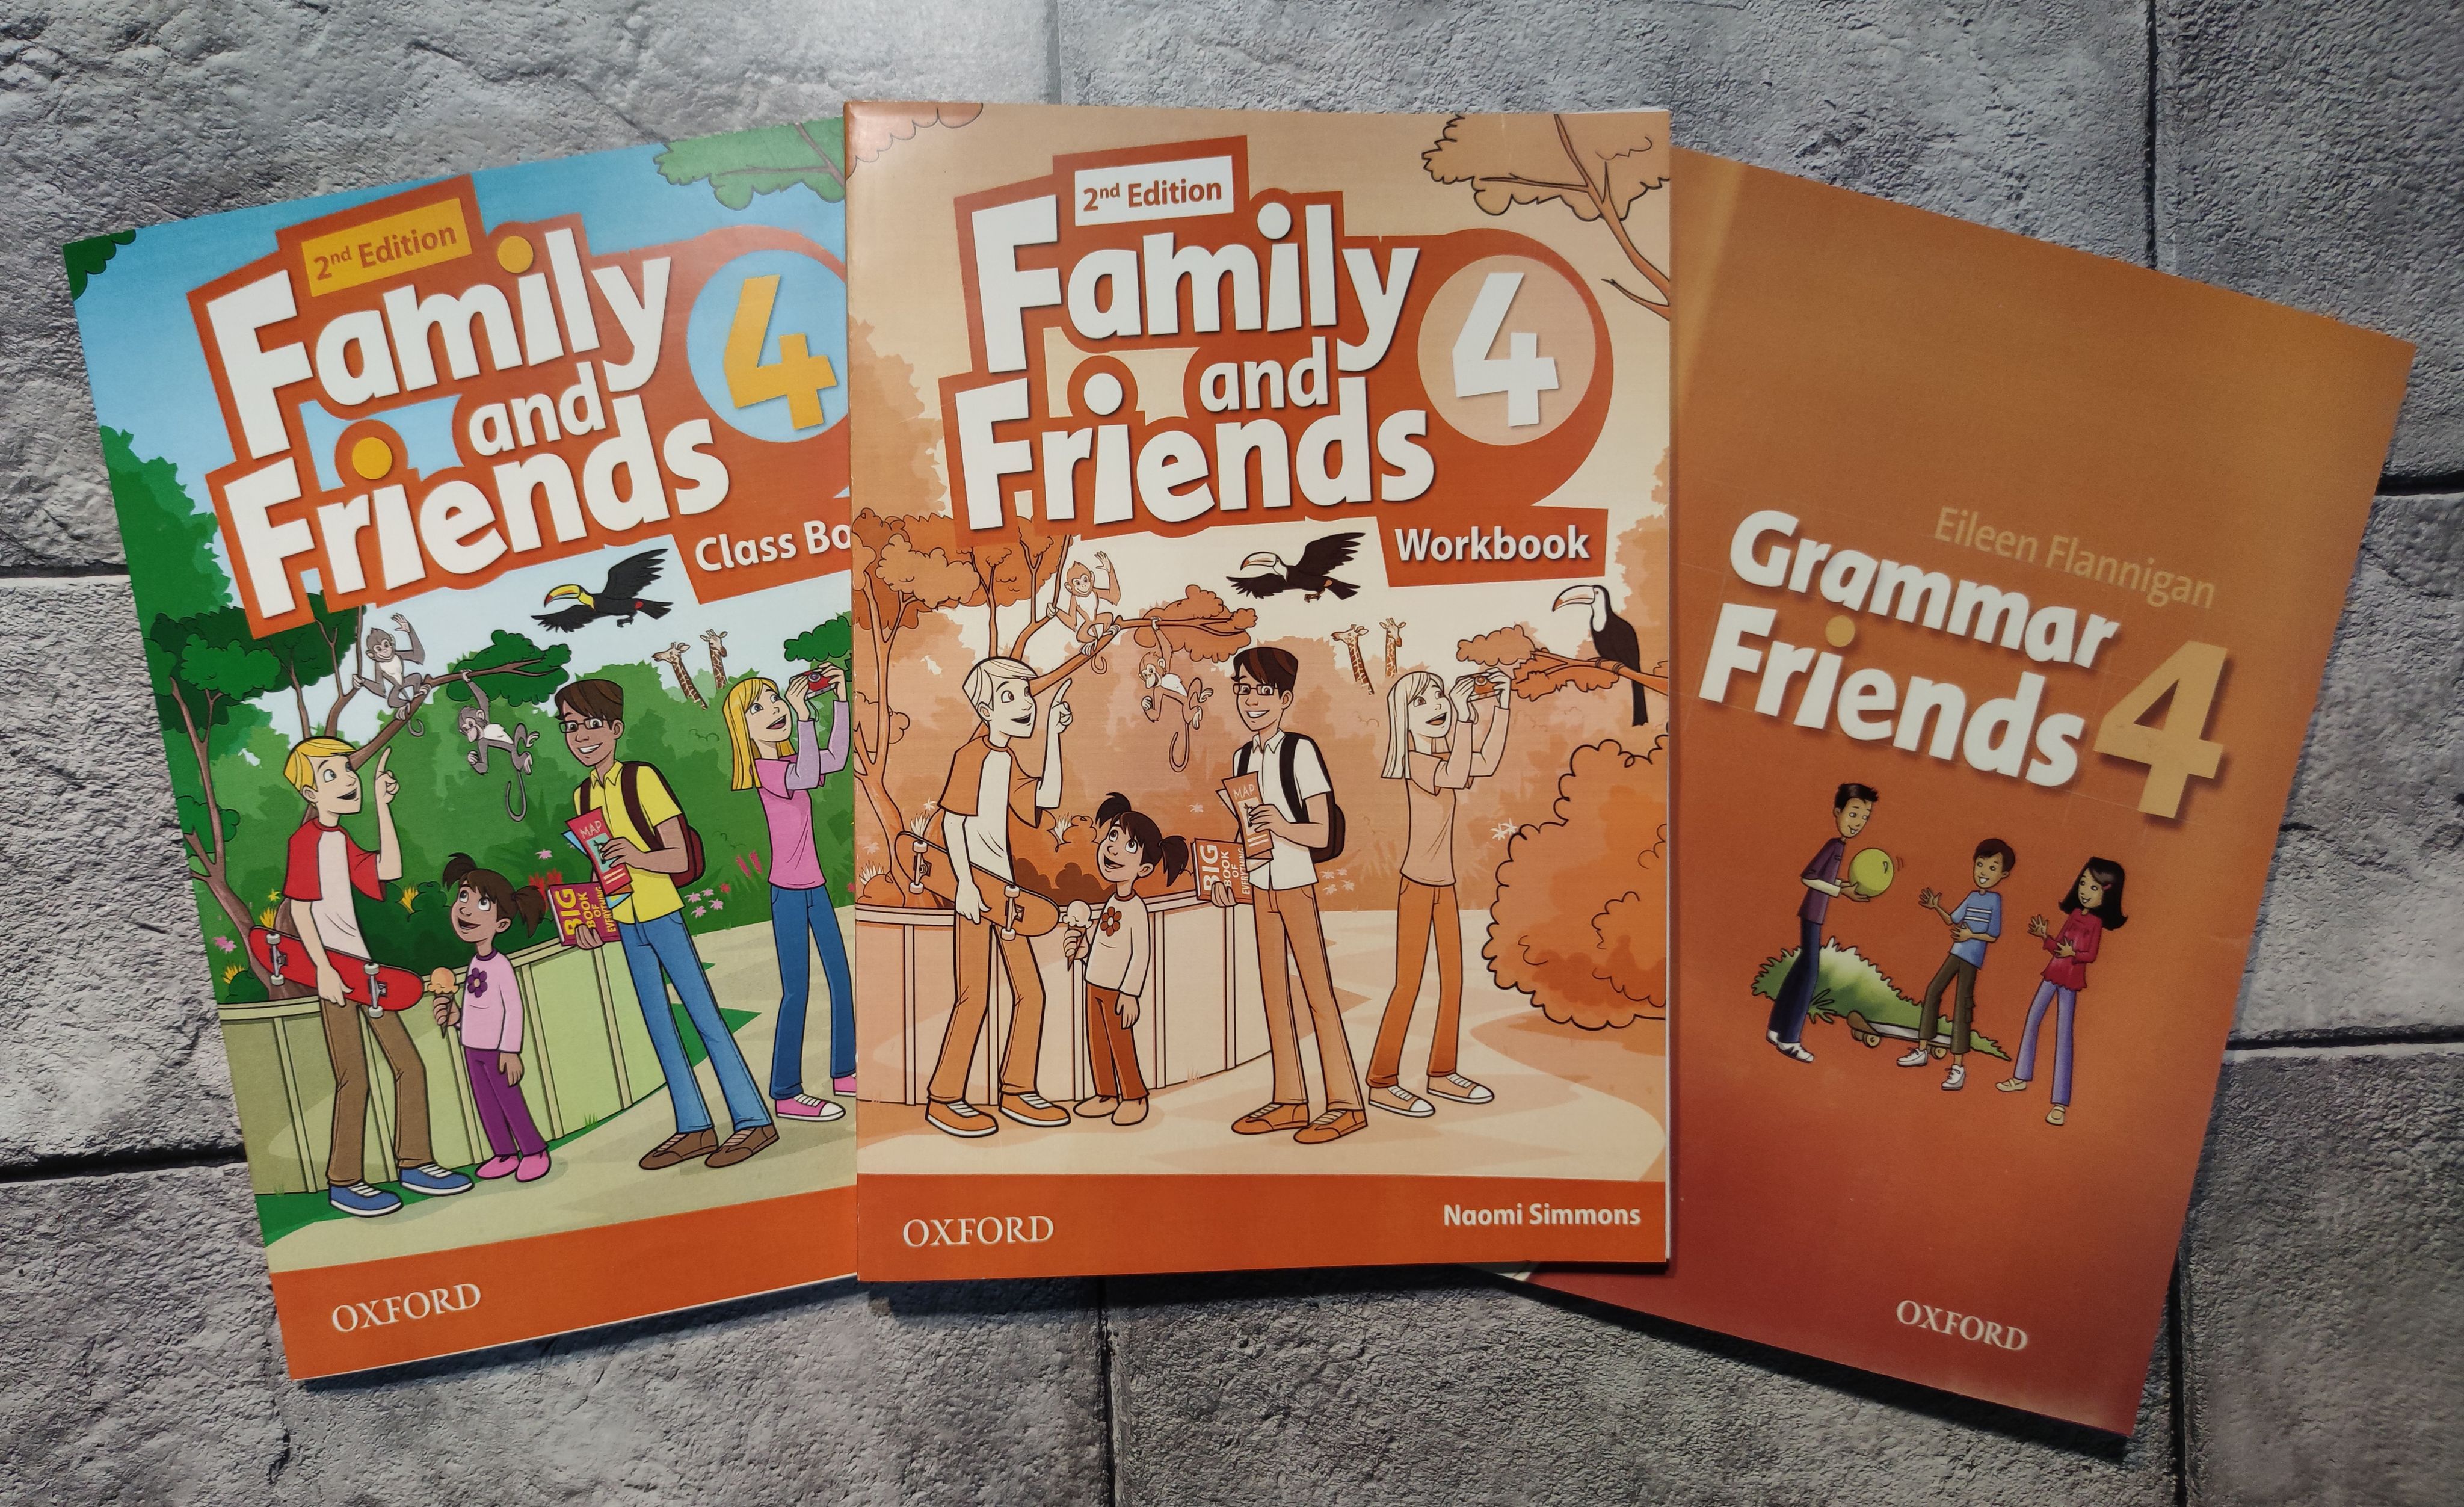 Family and friends 4 2nd edition workbook. Grammar friends 4. Family and friends 6 class book. Grammar friends 2. Family and friends 4 class book.